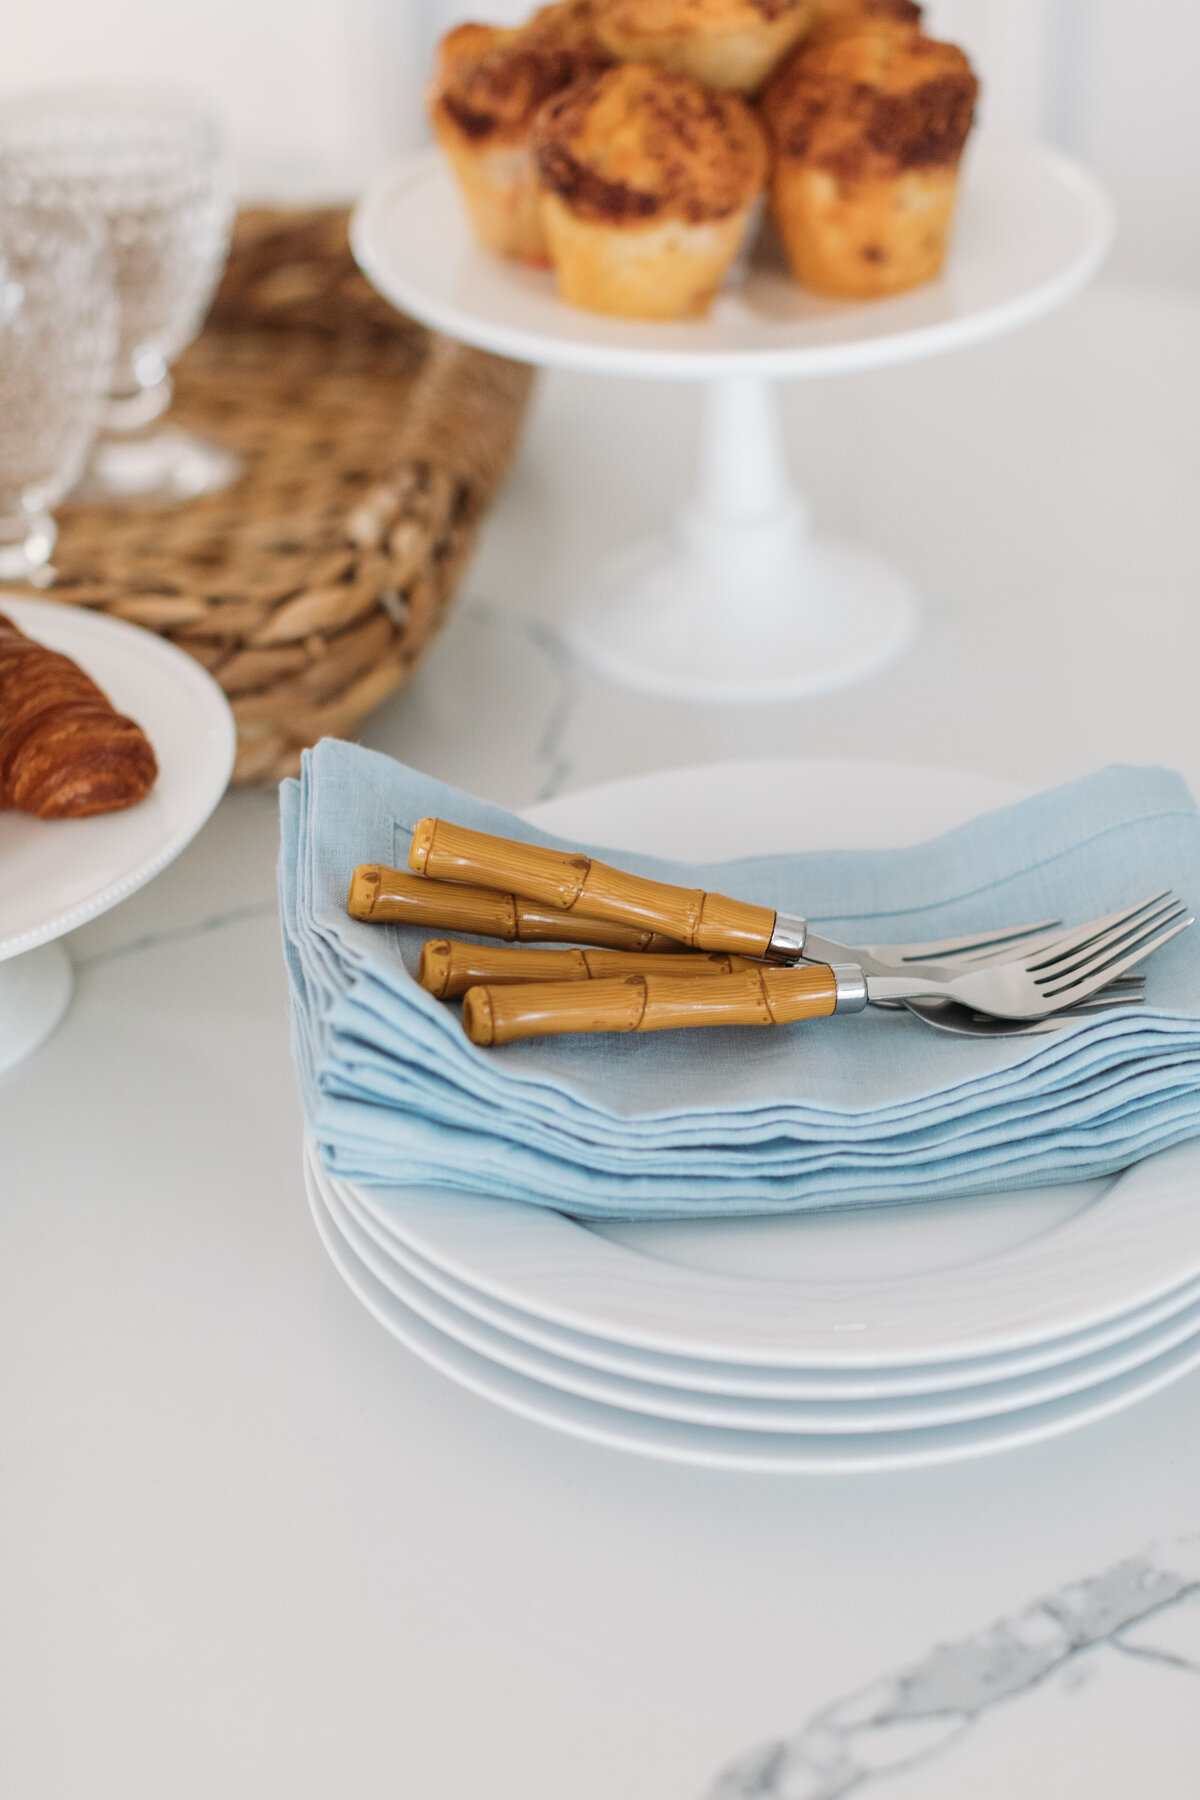 White plates with blue linen napkins and bamboo flatware